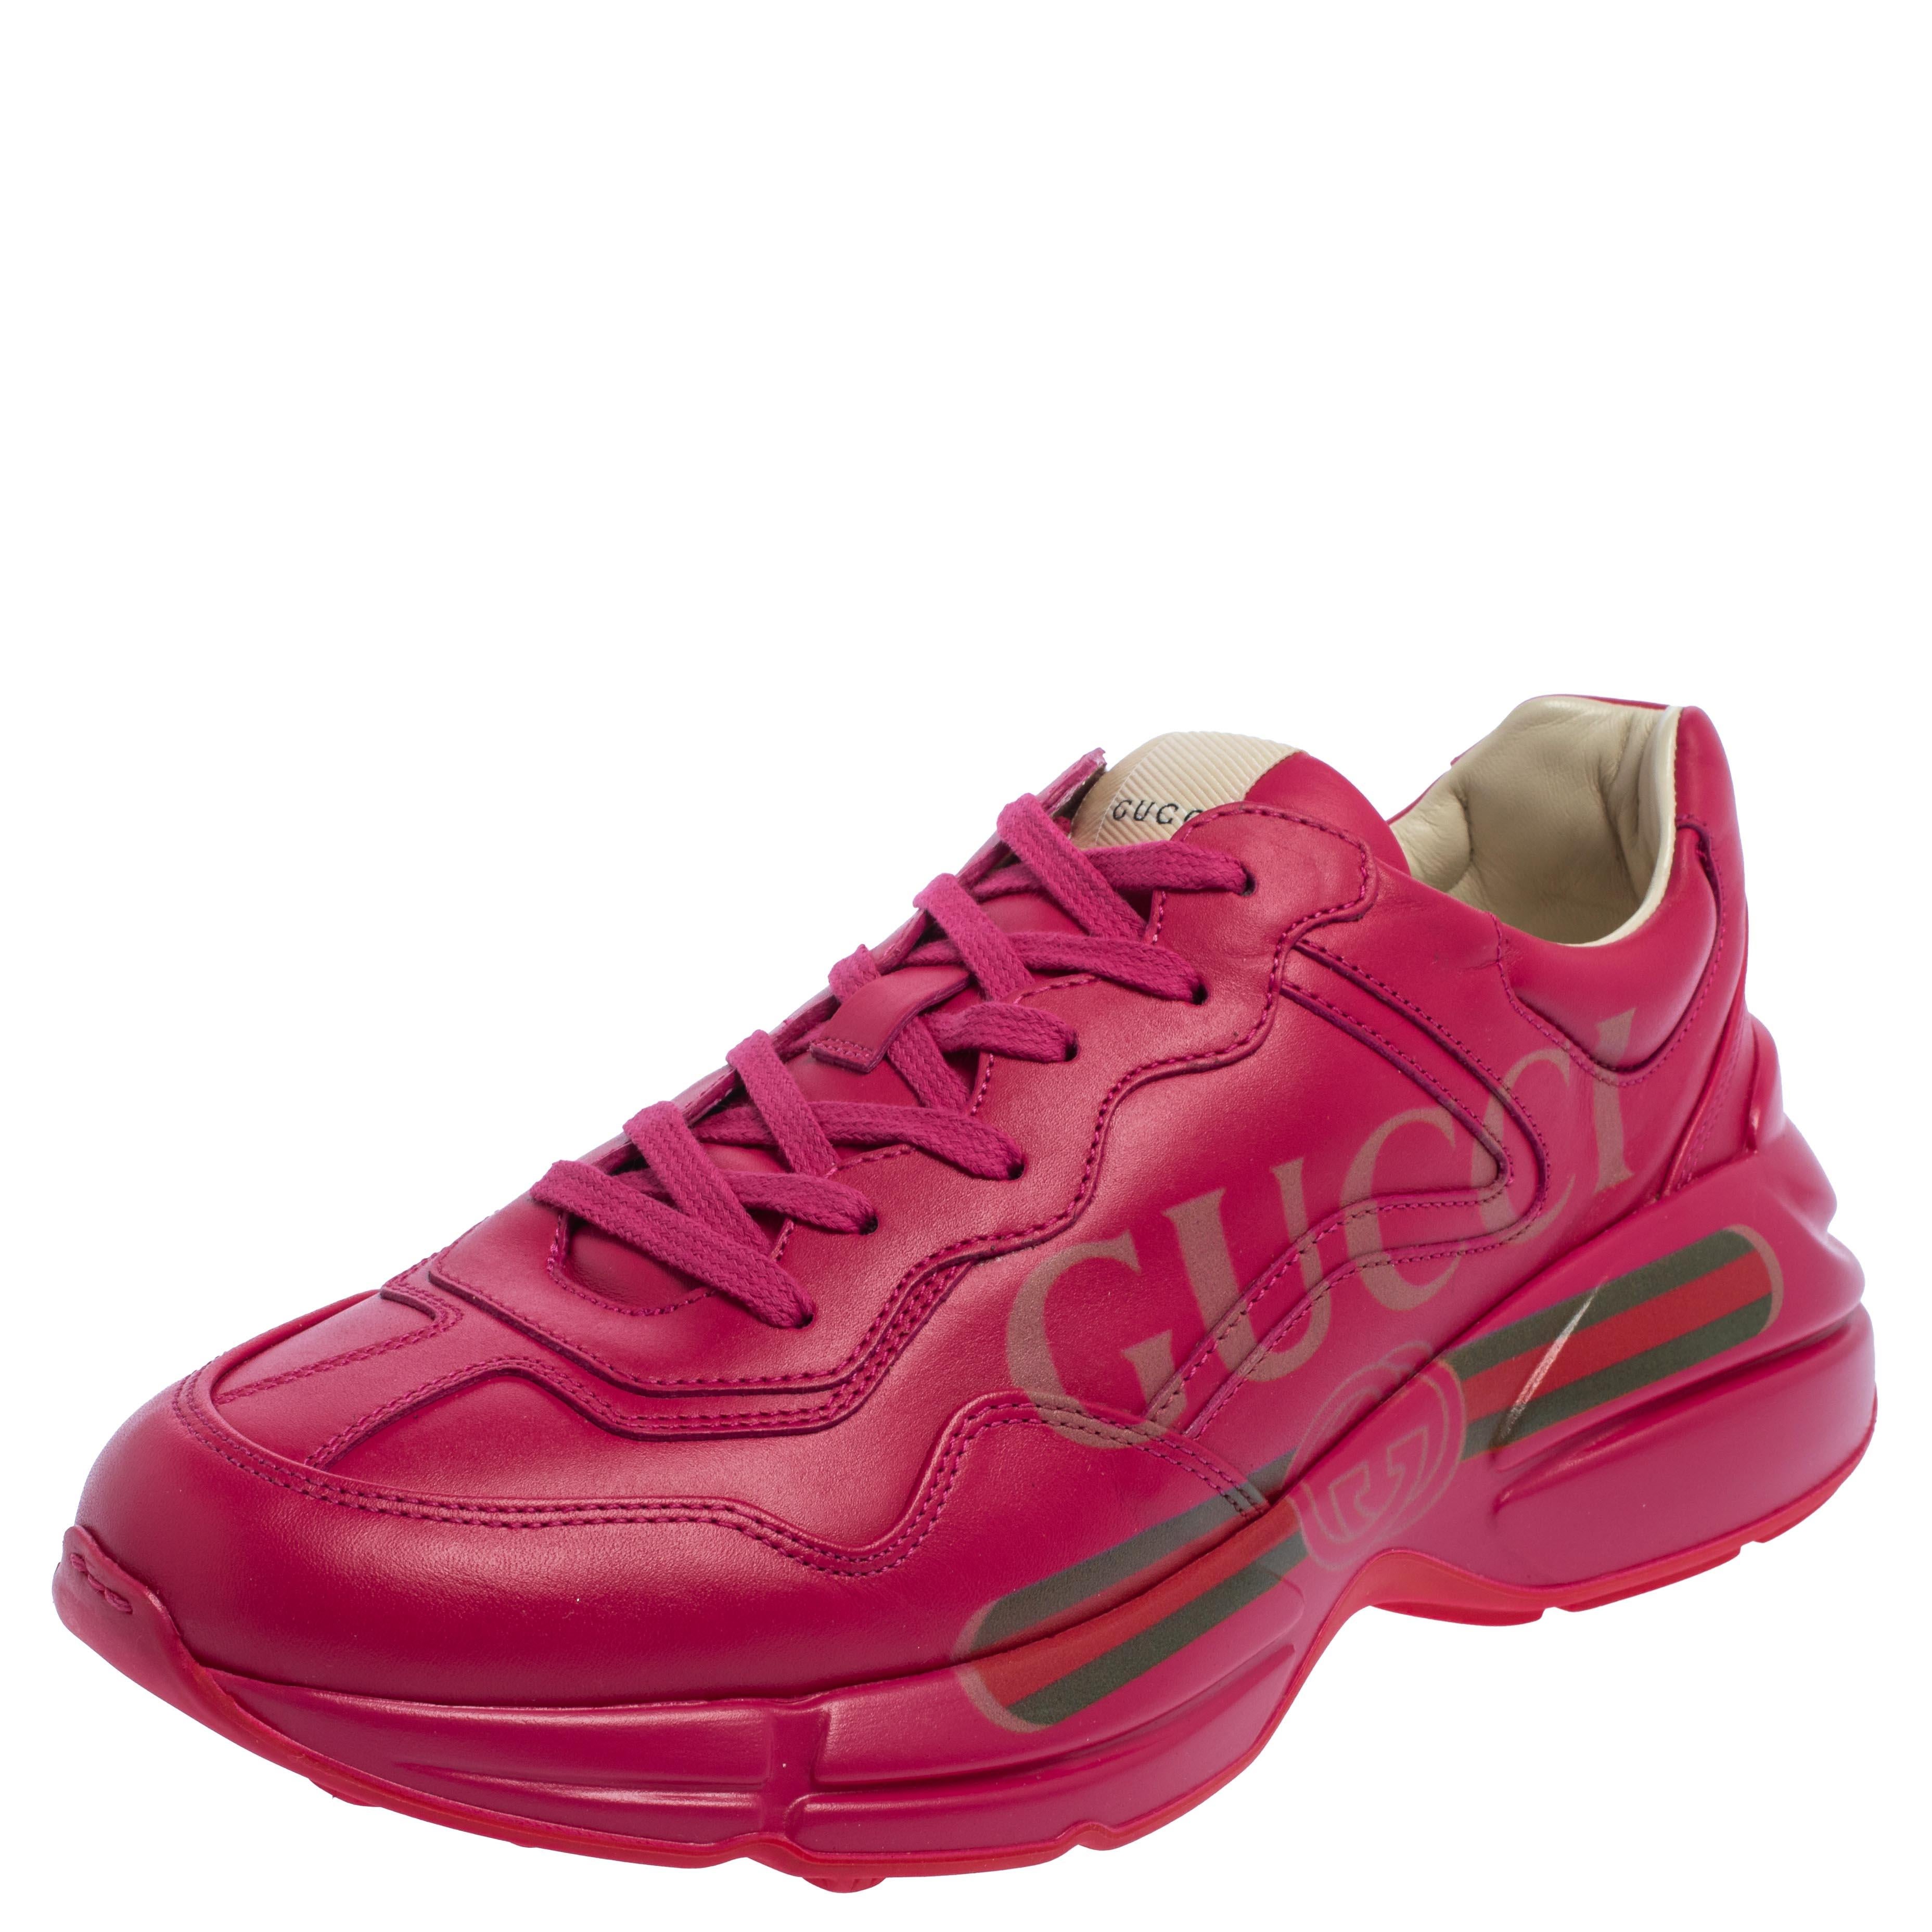 The time to feel trendy is now as Gucci brings you these superhit sneakers in eye-catching pink. They are crafted from leather, detailed with lace-ups and vintage logo on the sides, and are set on chunky soles. You are sure to receive nods of